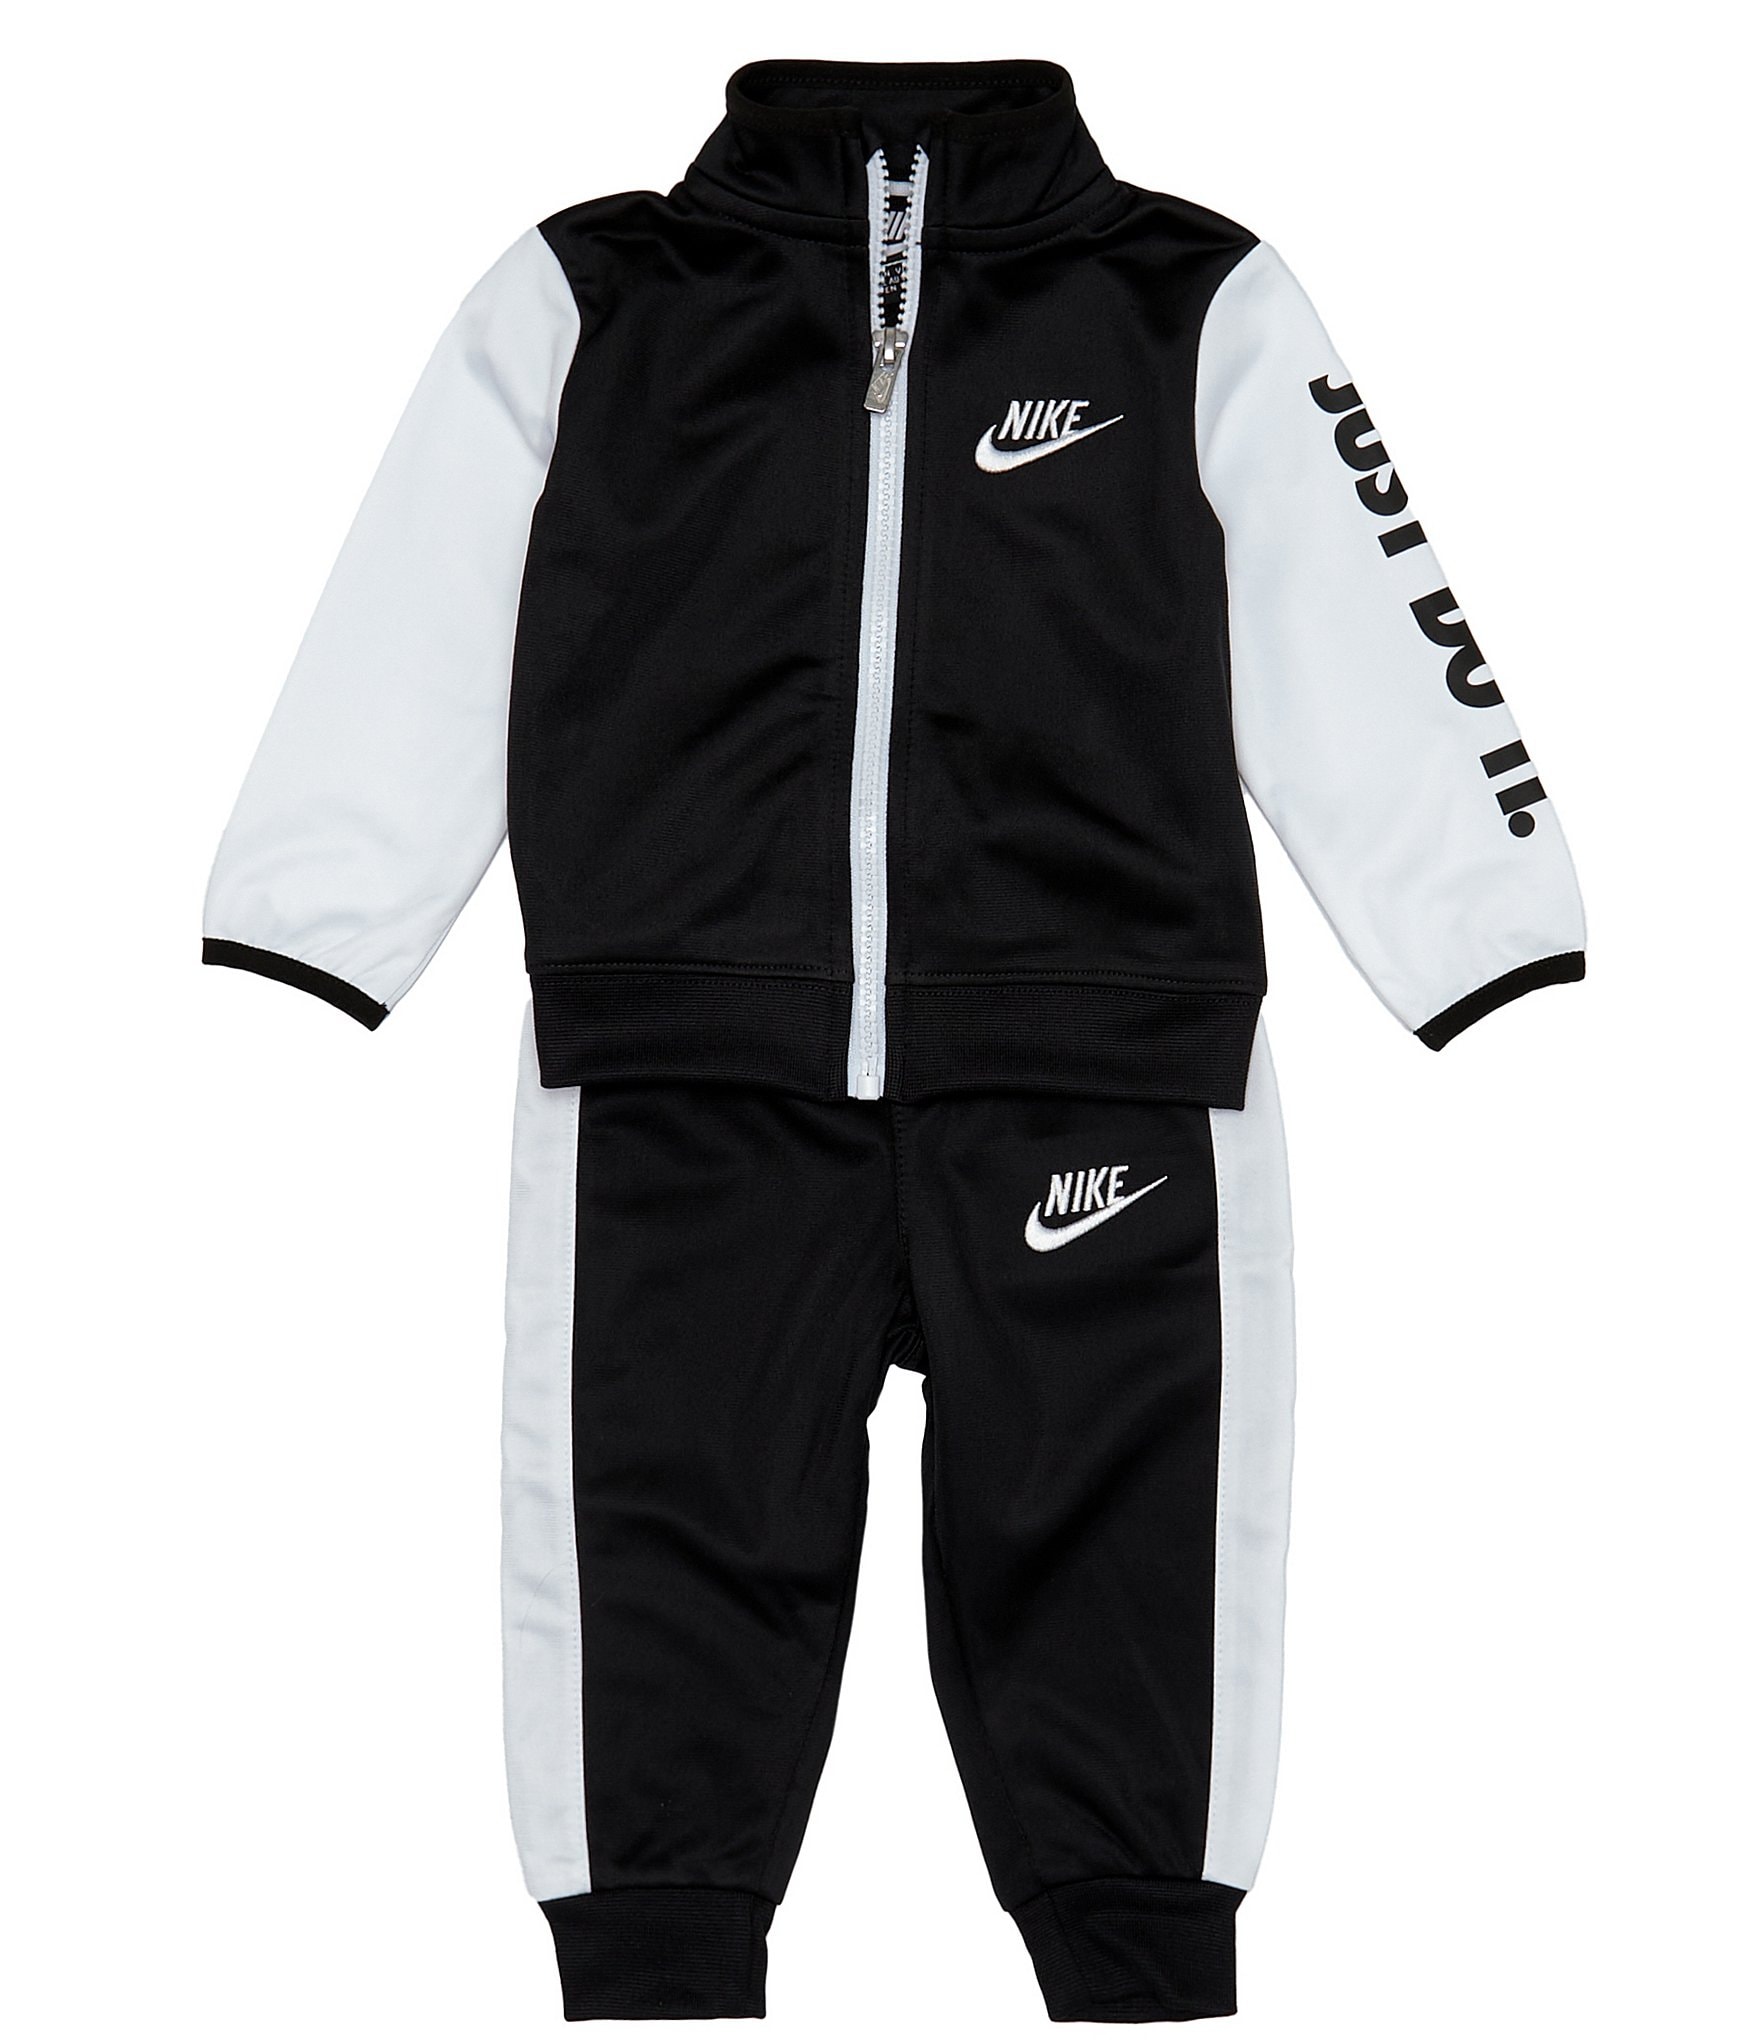 Nike Baby Boys 12-24 Months Long Sleeve Just Do It Tricot Jacket ...